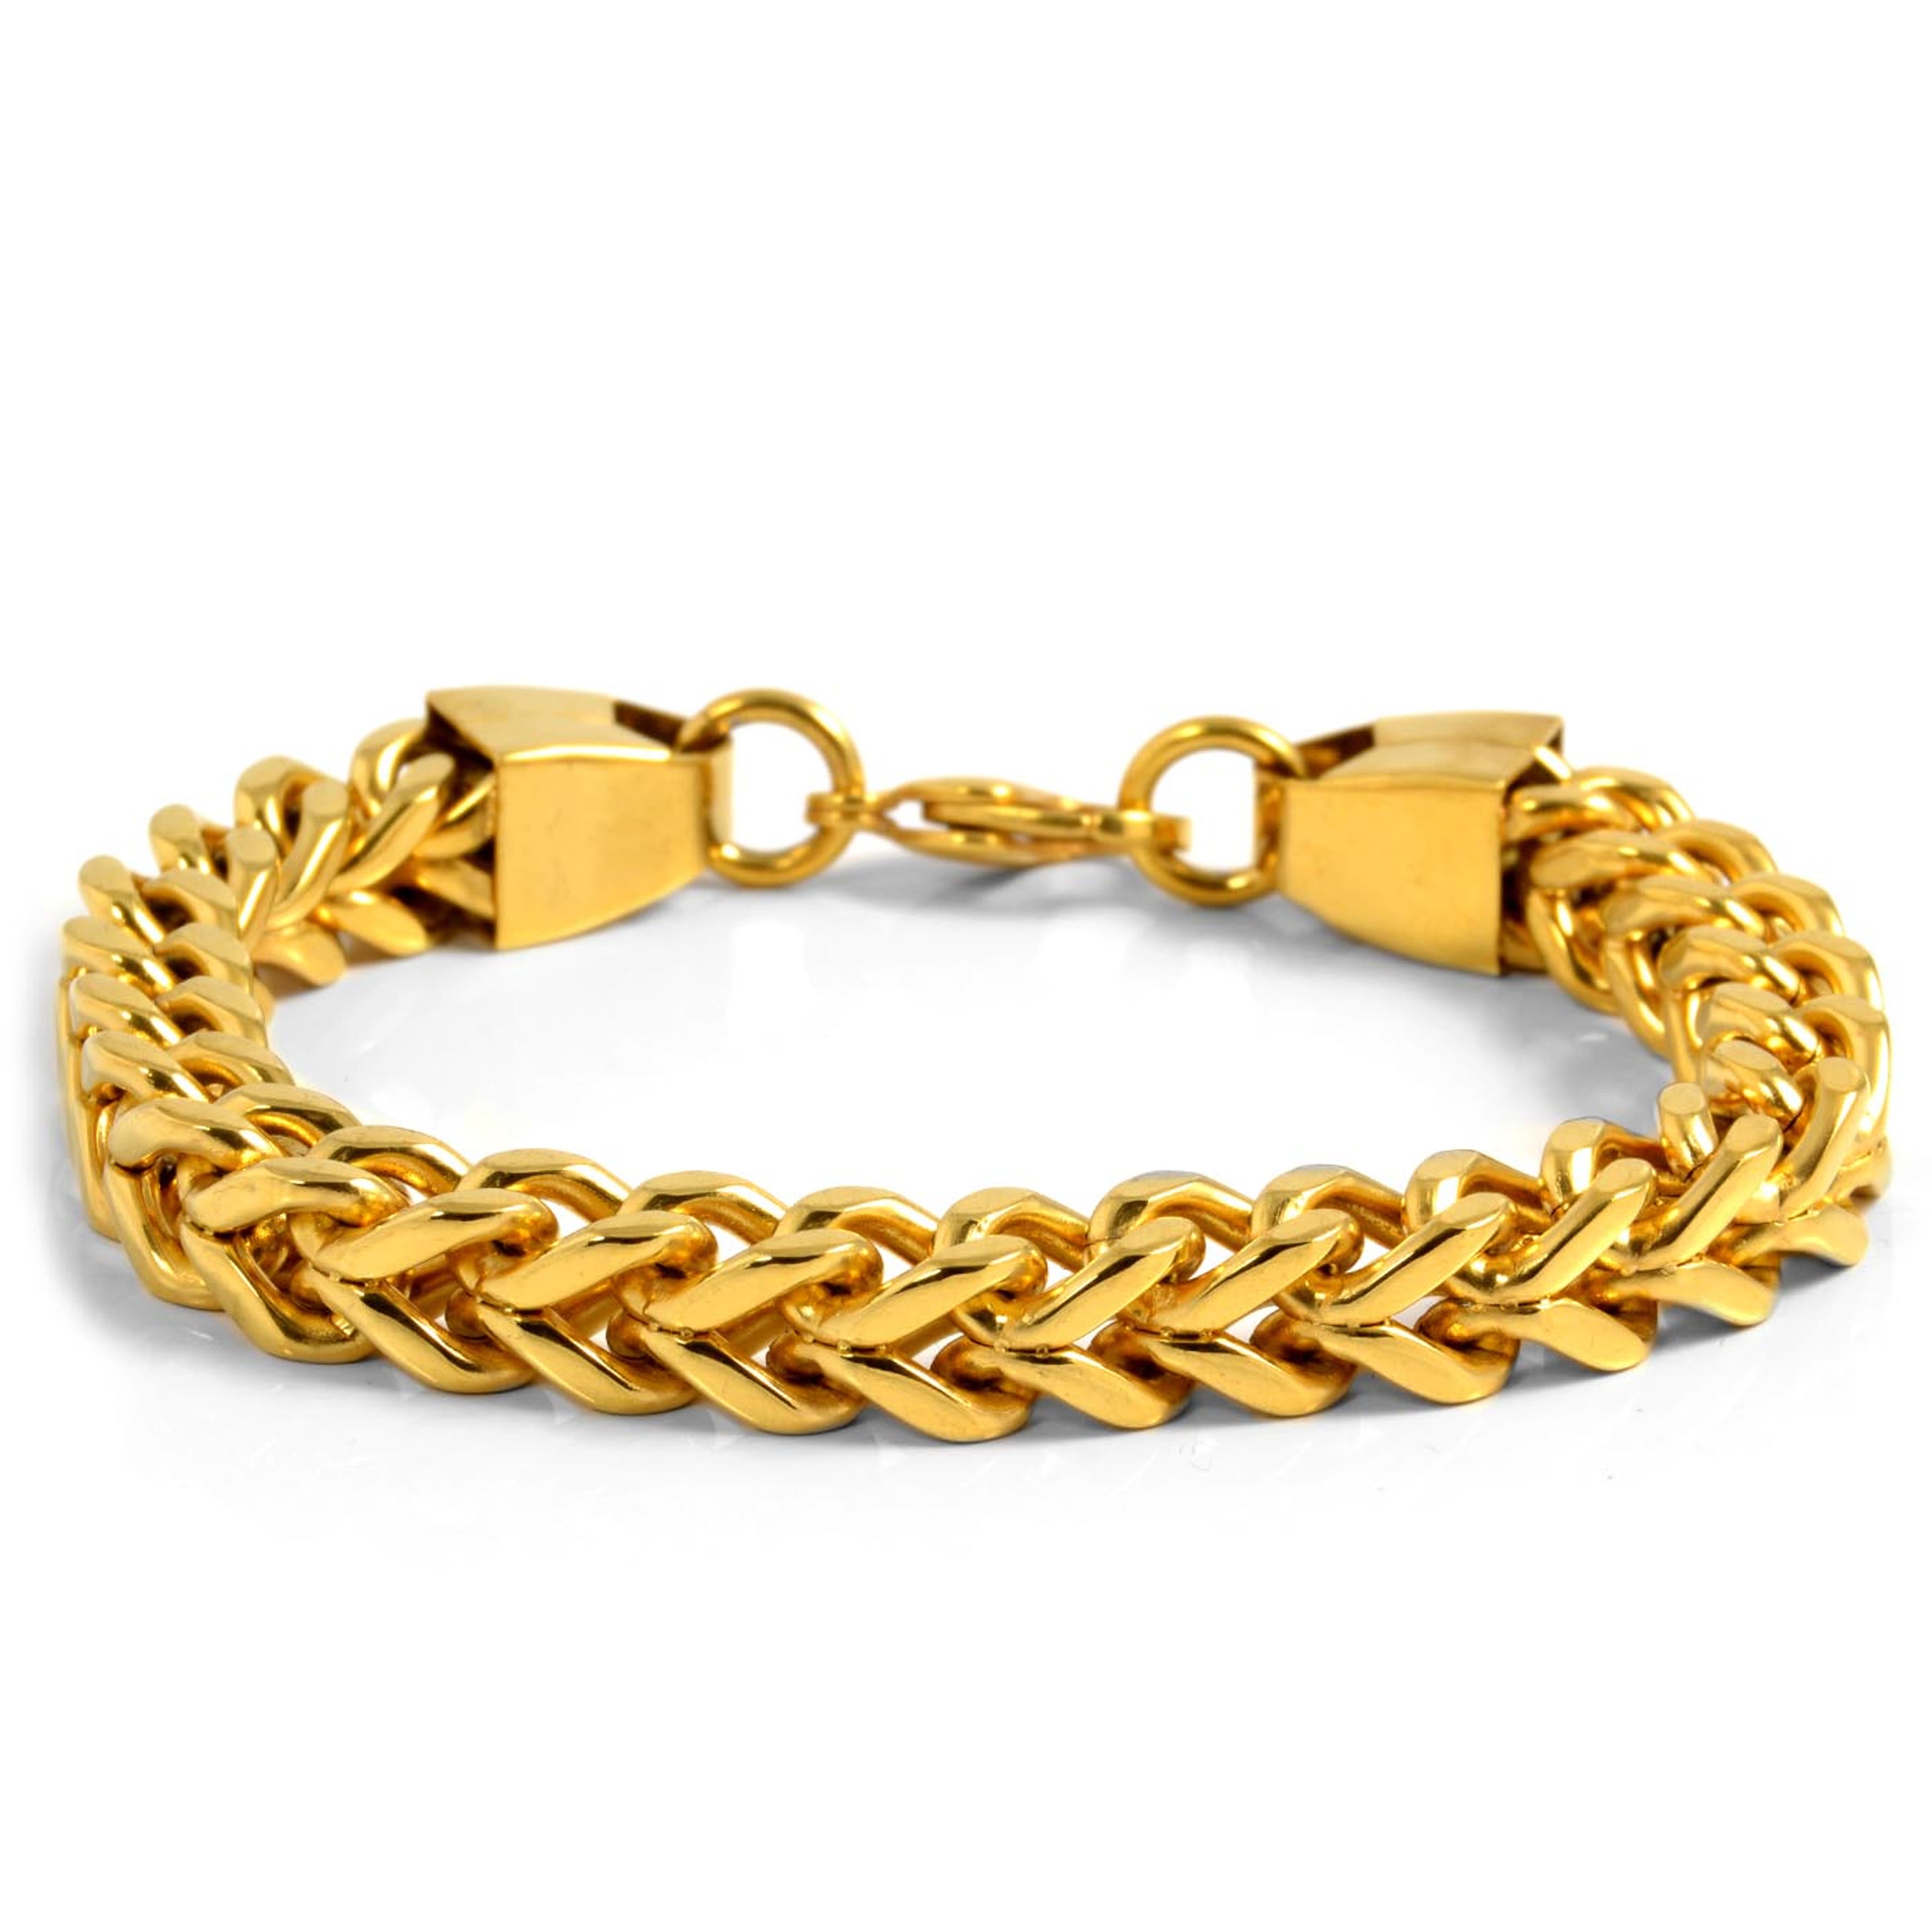 Gold-Tone Stainless Steel Cuban Curb Chain Bracelet